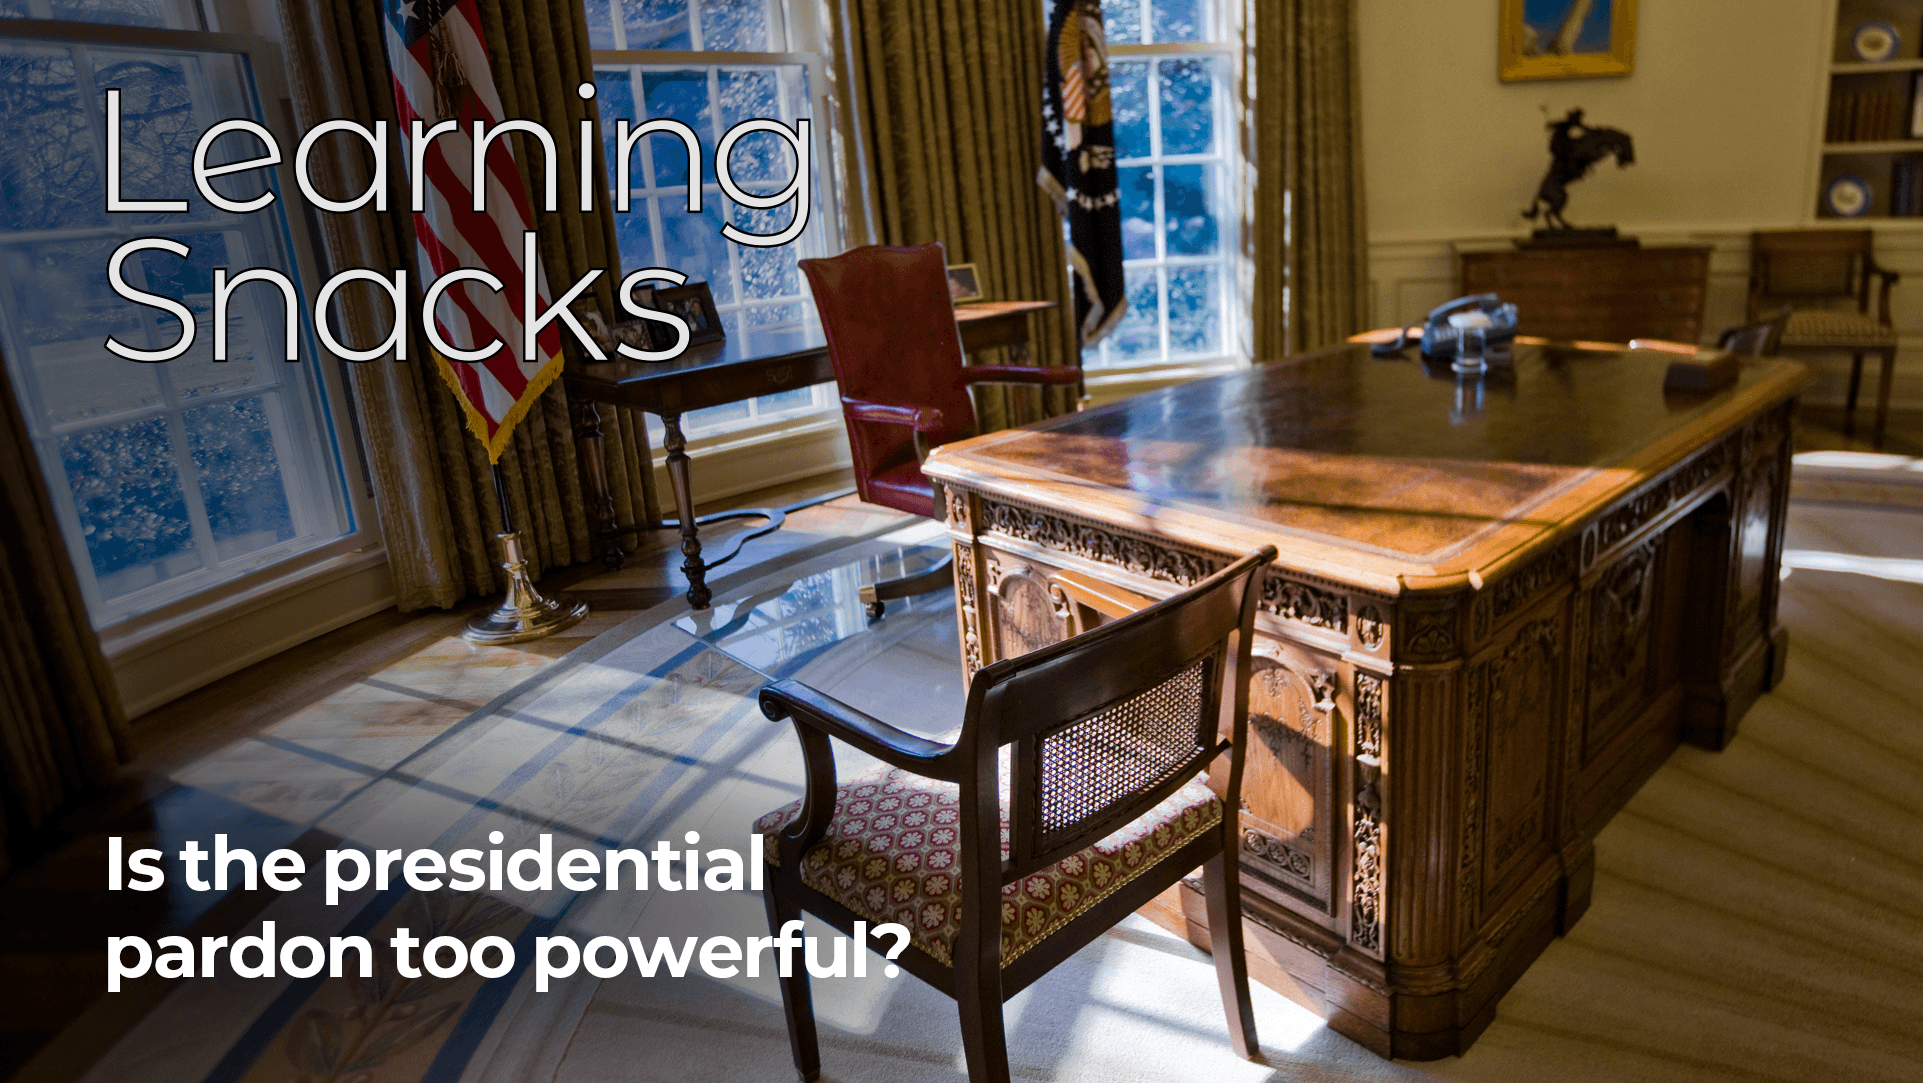 Learning Snacks - Presidents, Pardons, and Power